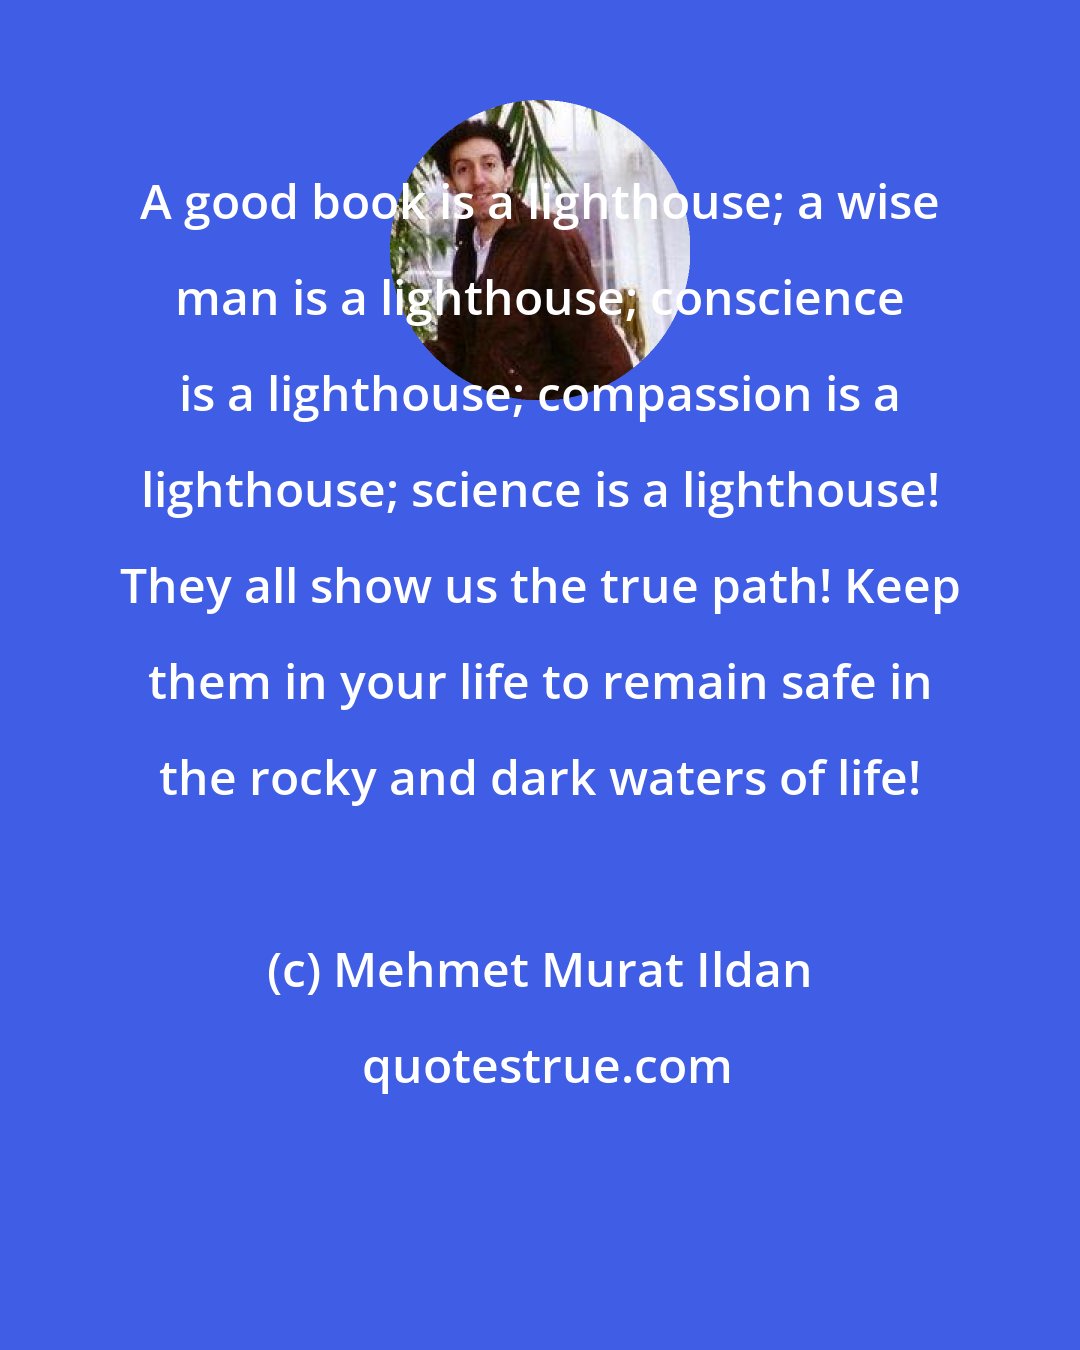 Mehmet Murat Ildan: A good book is a lighthouse; a wise man is a lighthouse; conscience is a lighthouse; compassion is a lighthouse; science is a lighthouse! They all show us the true path! Keep them in your life to remain safe in the rocky and dark waters of life!